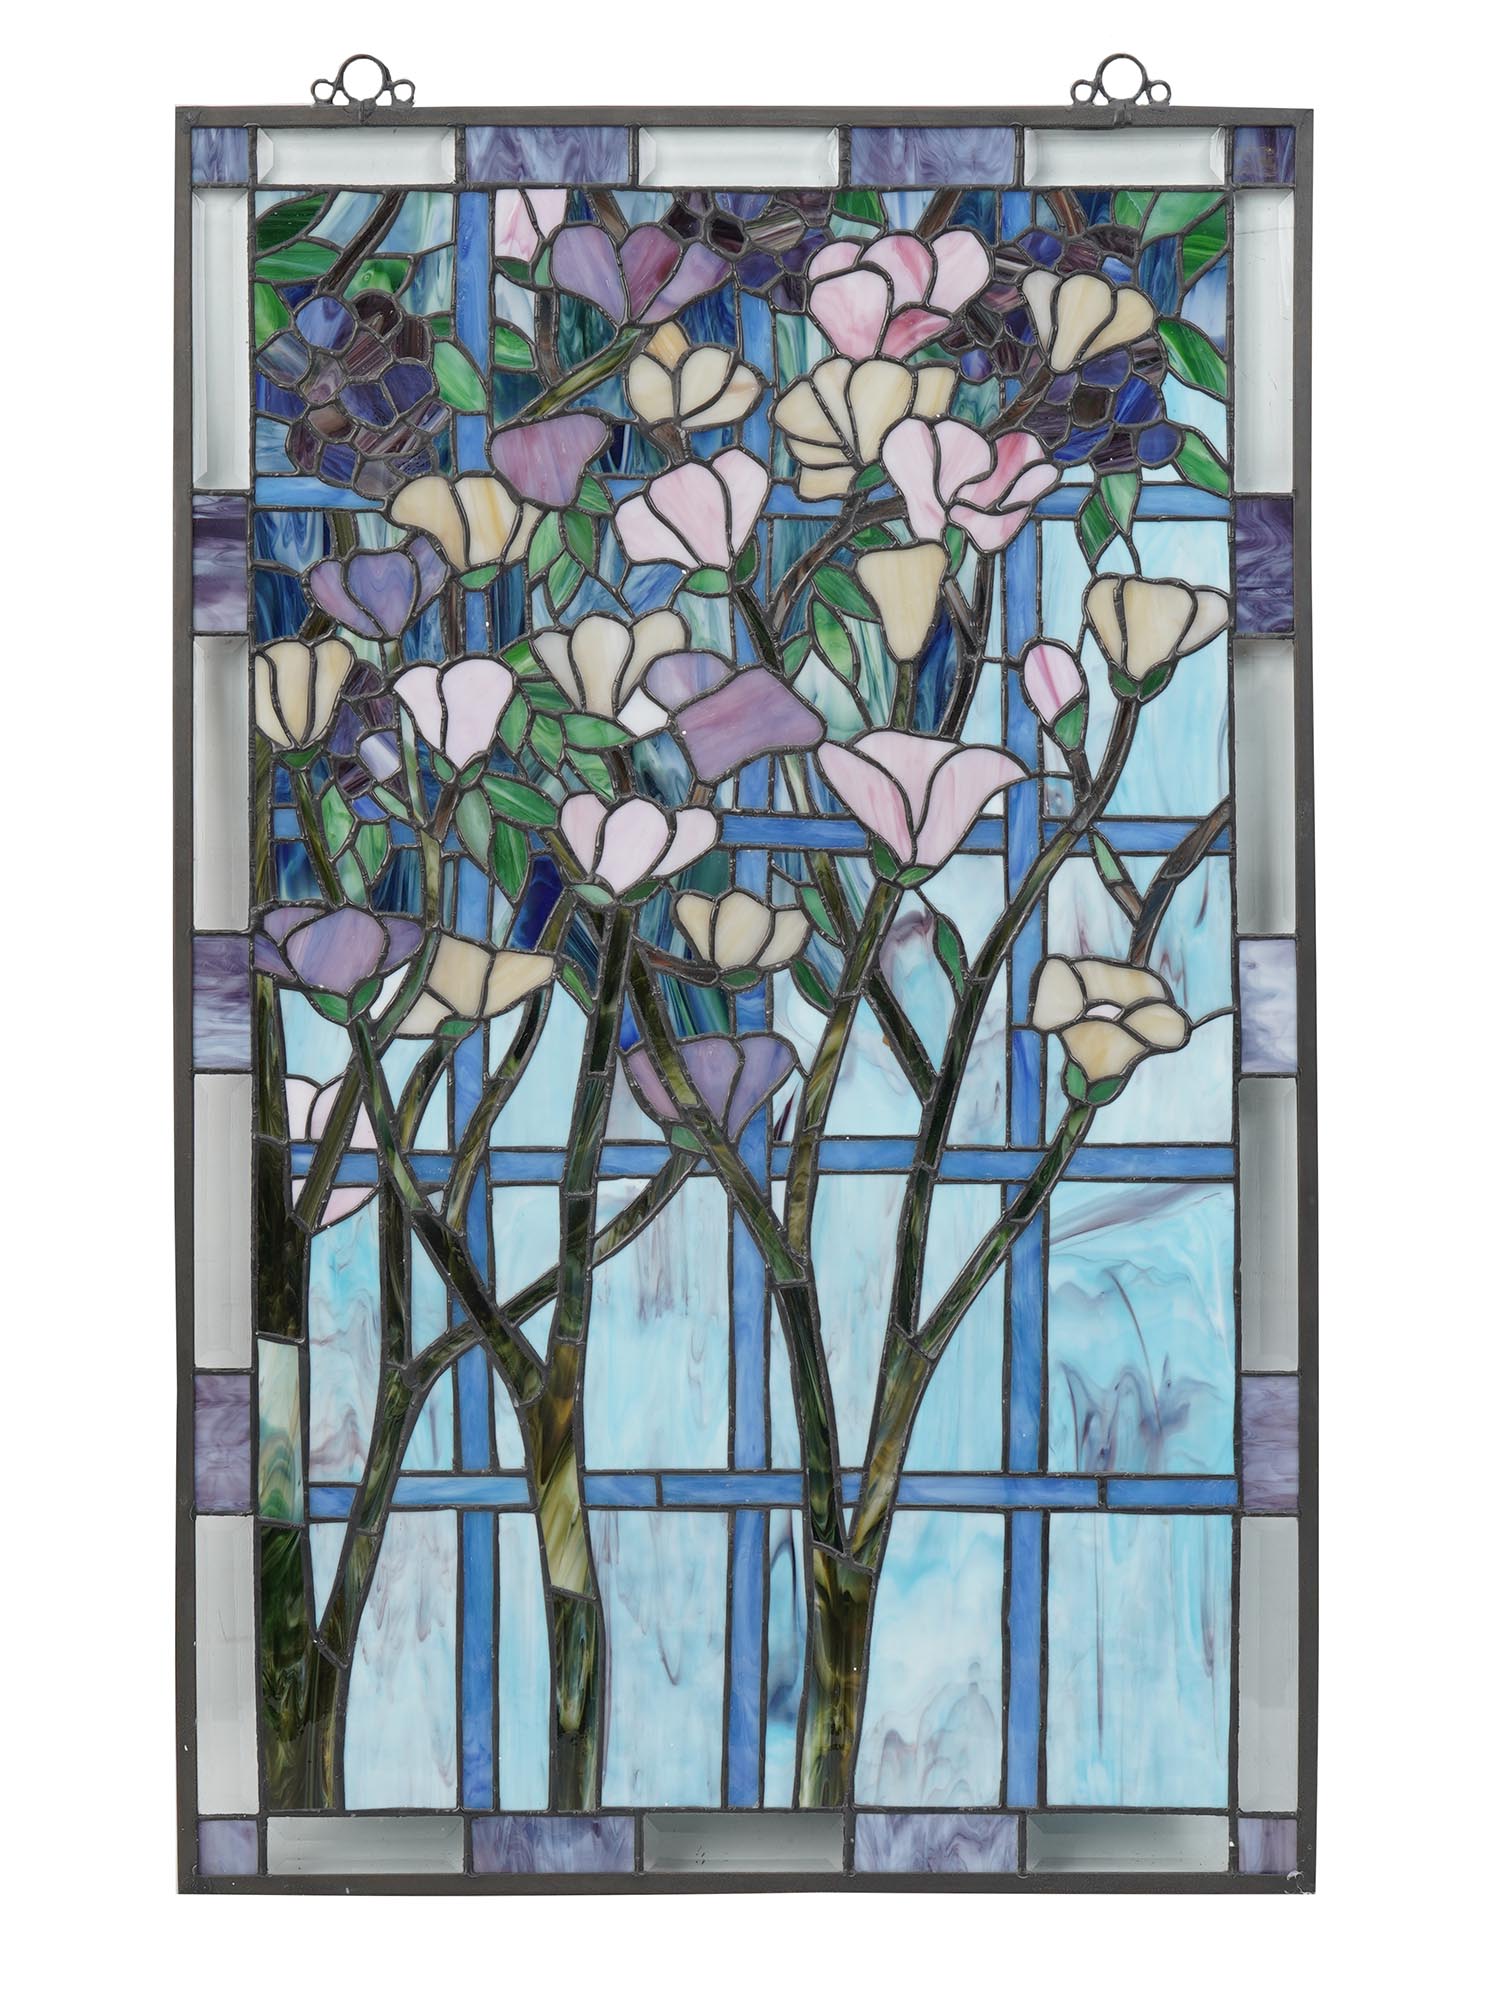 PAIR OF STAINED GLASS WINDOW PANELS FLOWERS TREES PIC-2